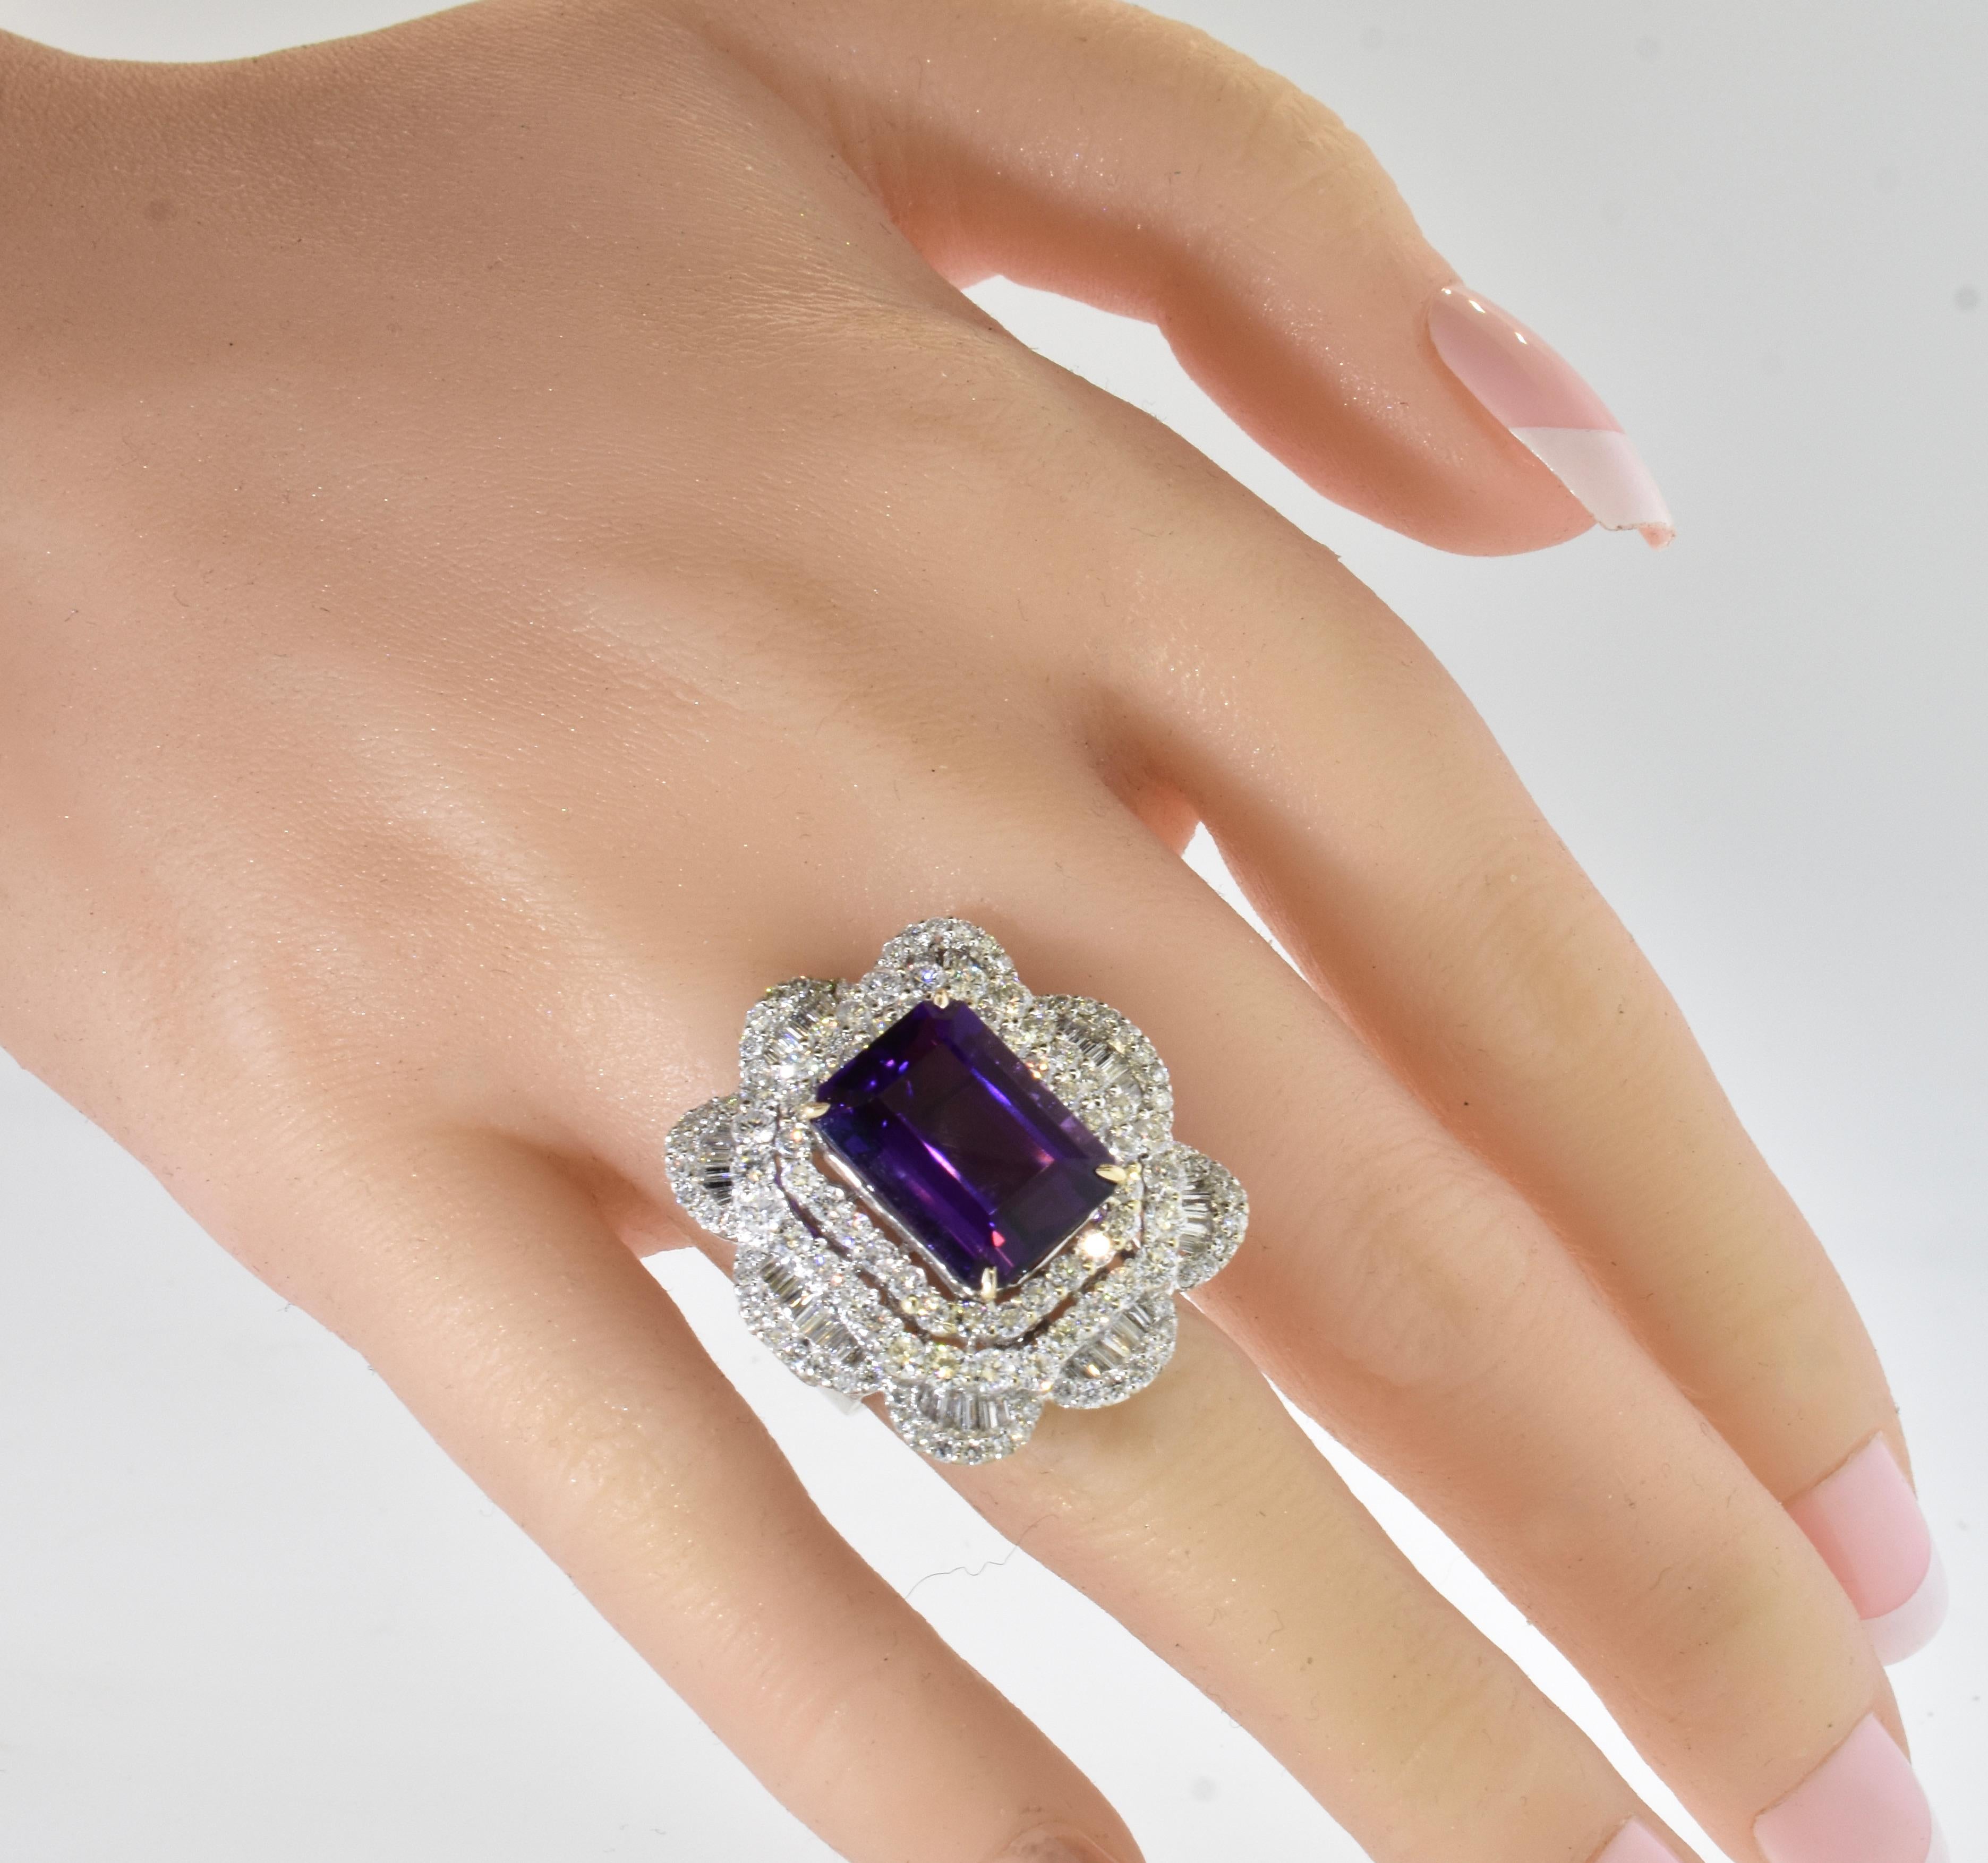 Amethyst and Diamond Large and Important 18K White Gold Ring.
This is a large, 1.25 inches vertically, by 1 - 1/8th inch ring that possesses a complex white on white design and that centers a 9.5 ct. emerald cut gem amethyst of vivid purple color.